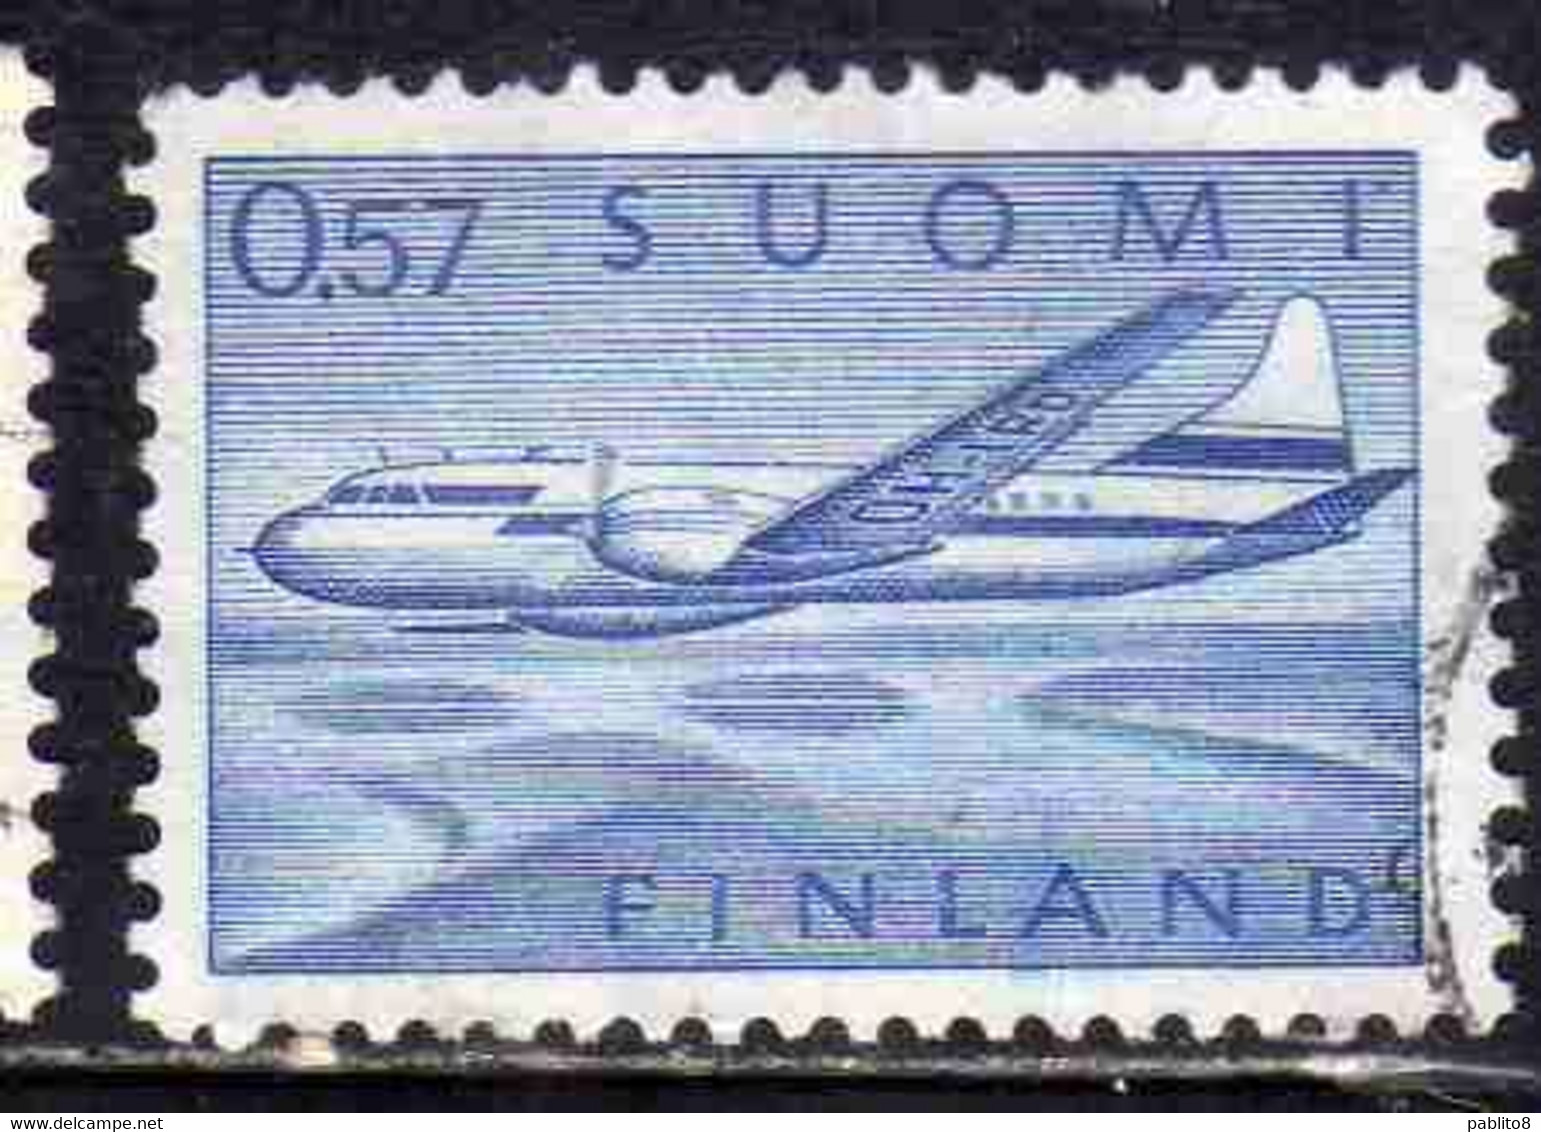 SUOMI FINLAND FINLANDIA FINLANDE 1970 AIR POST MAIL AIRMAIL CONVAIR OVER LAKES 0.57m 57p USED USATO OBLITERE' - Used Stamps